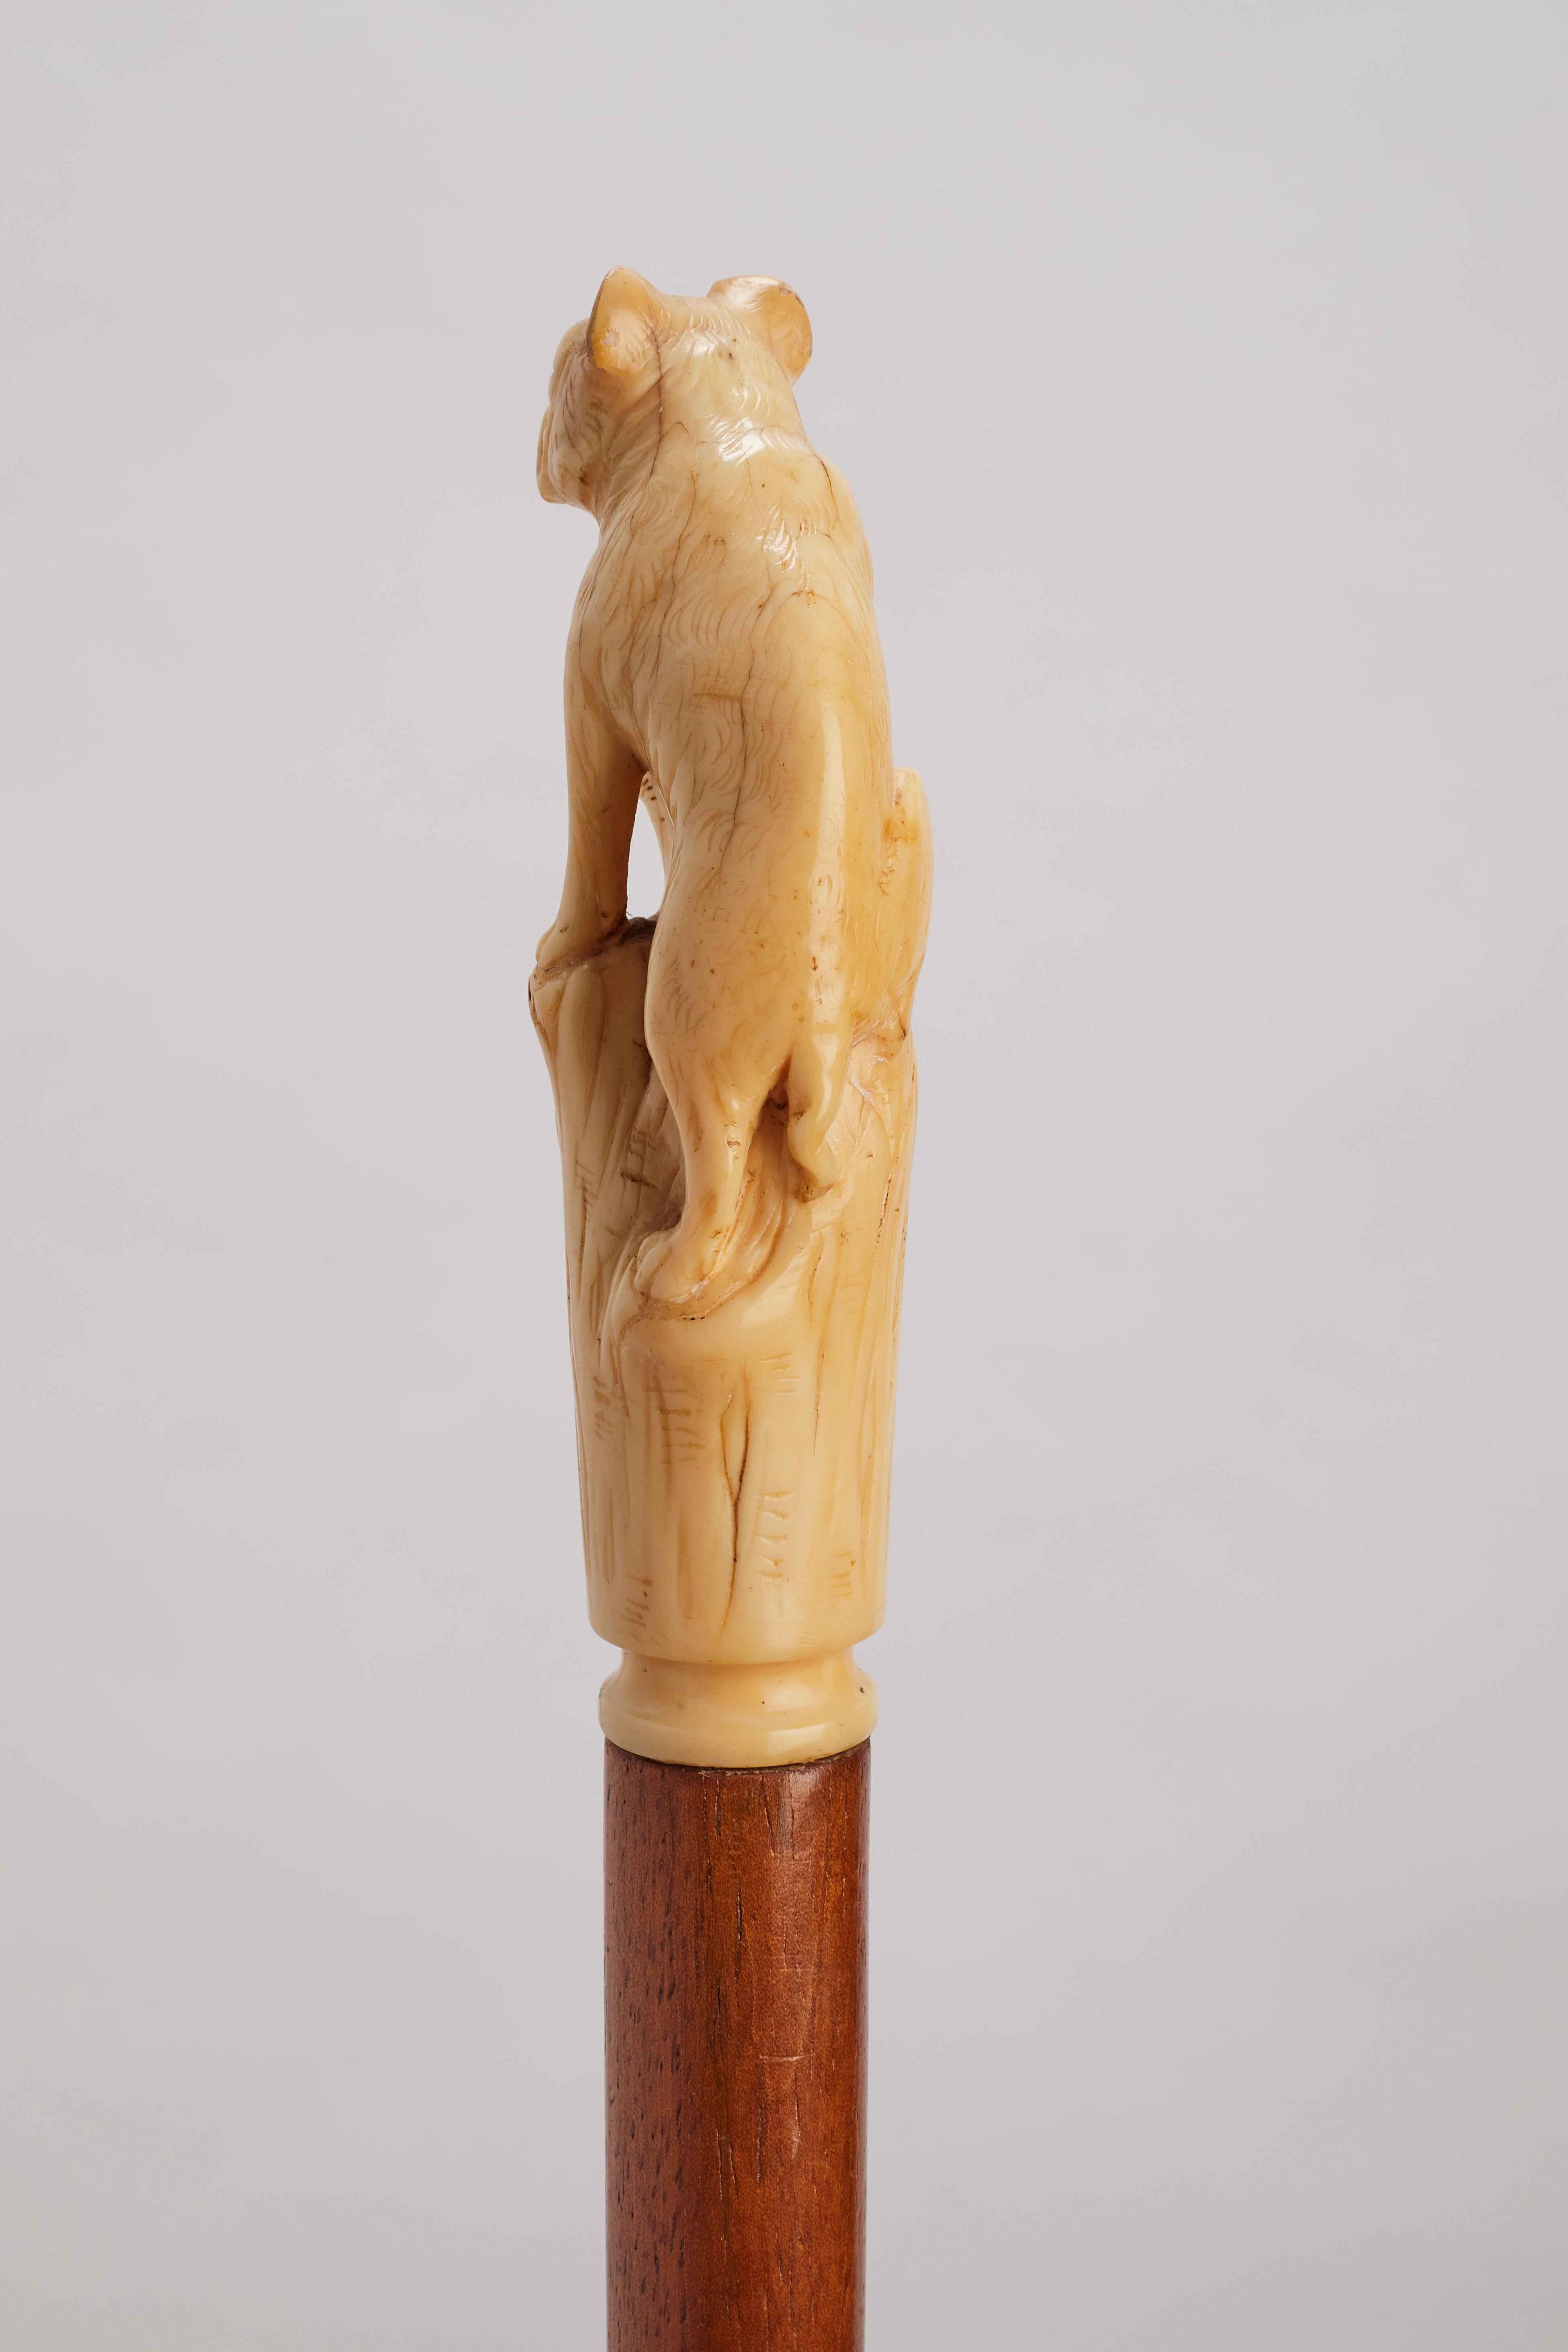 19th Century Ivory handle walking stick depicting a French bulldog, France 1880. For Sale